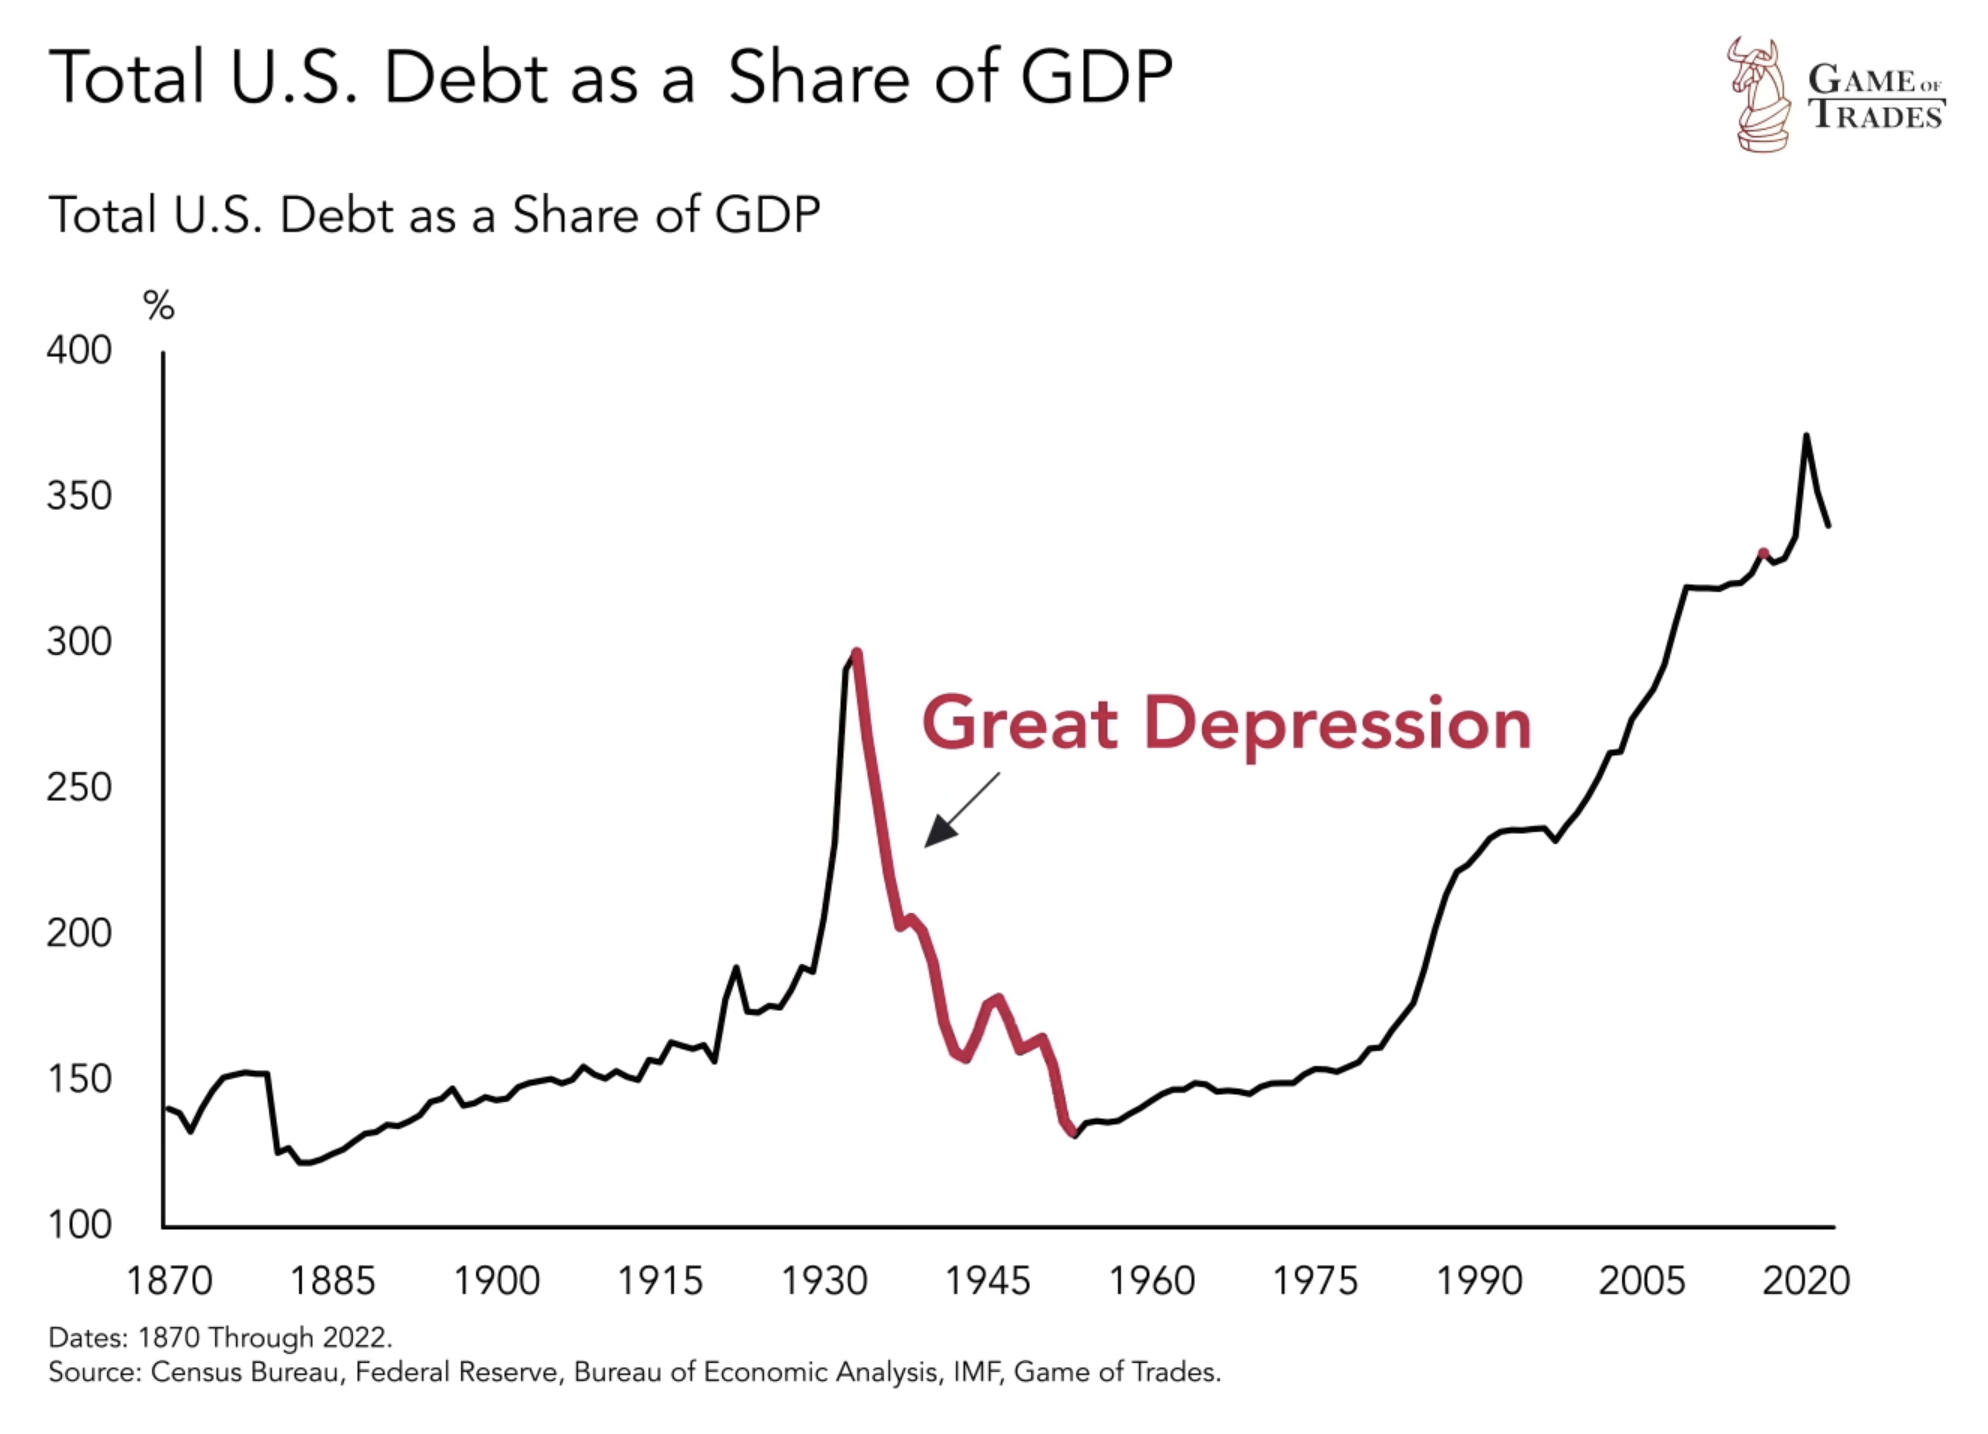 Total US Debt as share of GDP